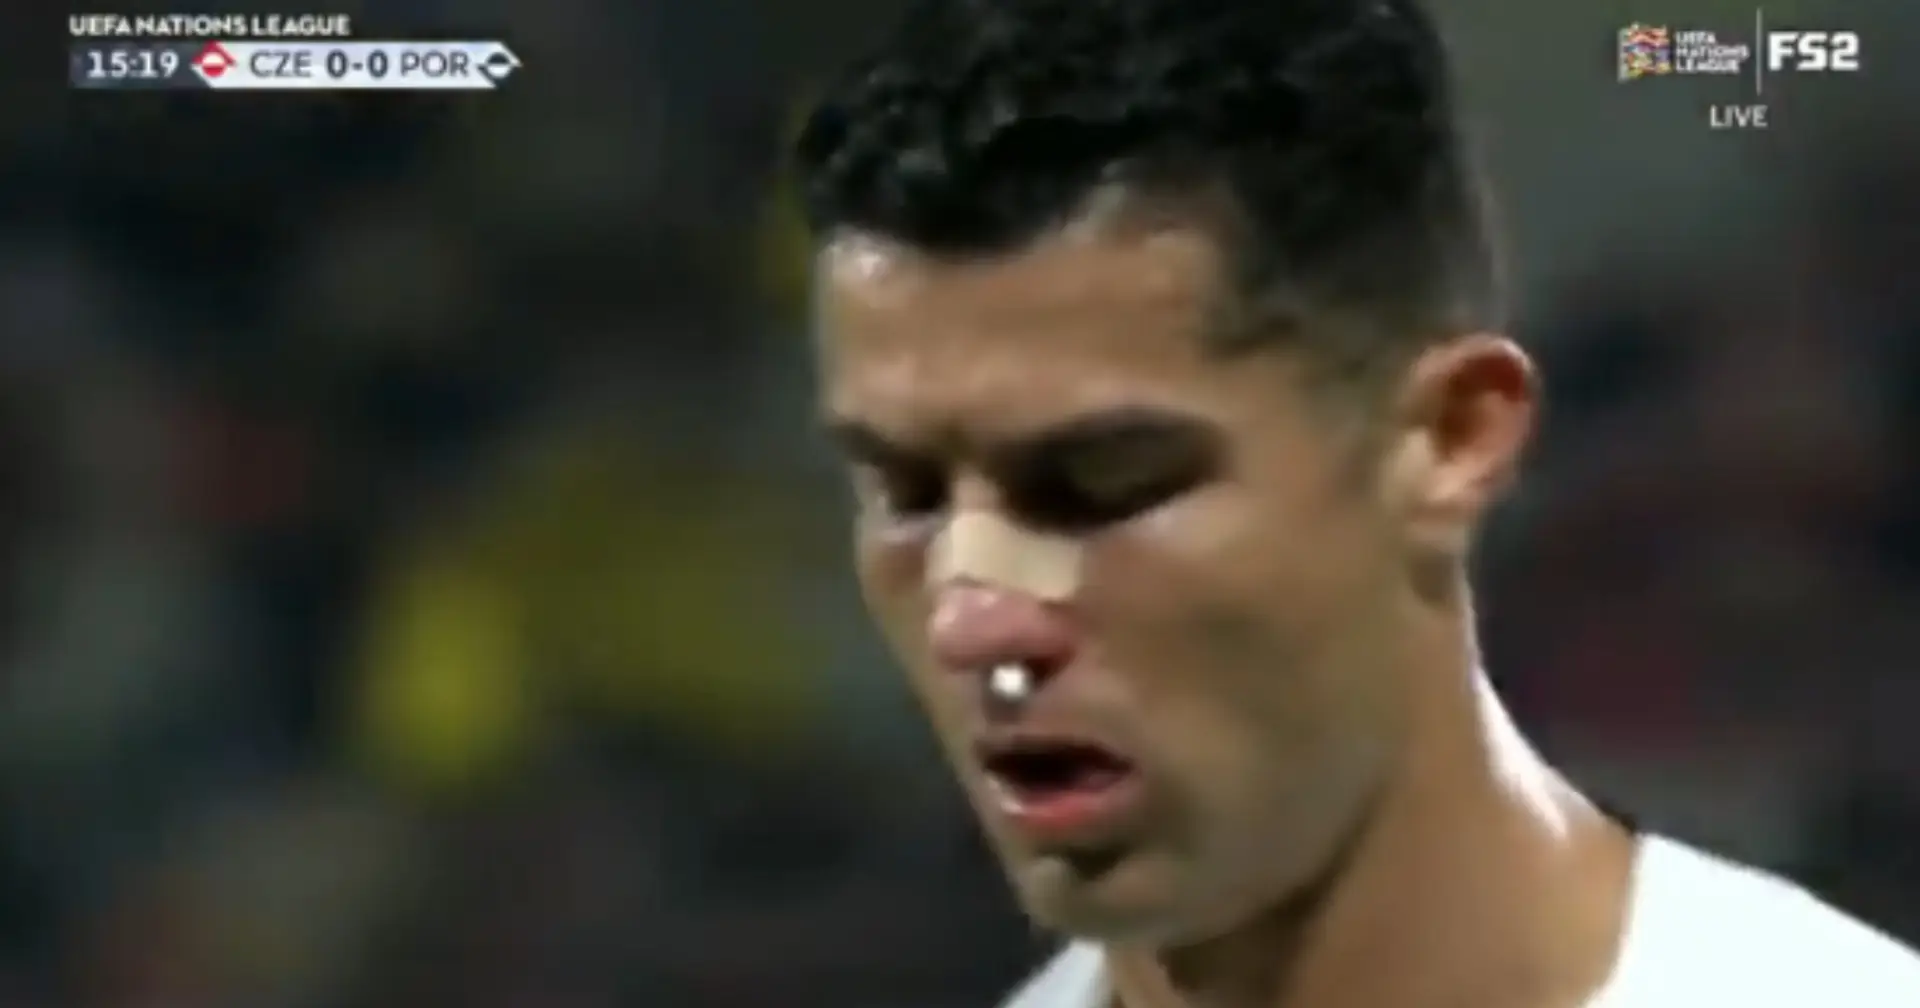 Cristiano Ronaldo sends message to fans after being left with bloodied nose